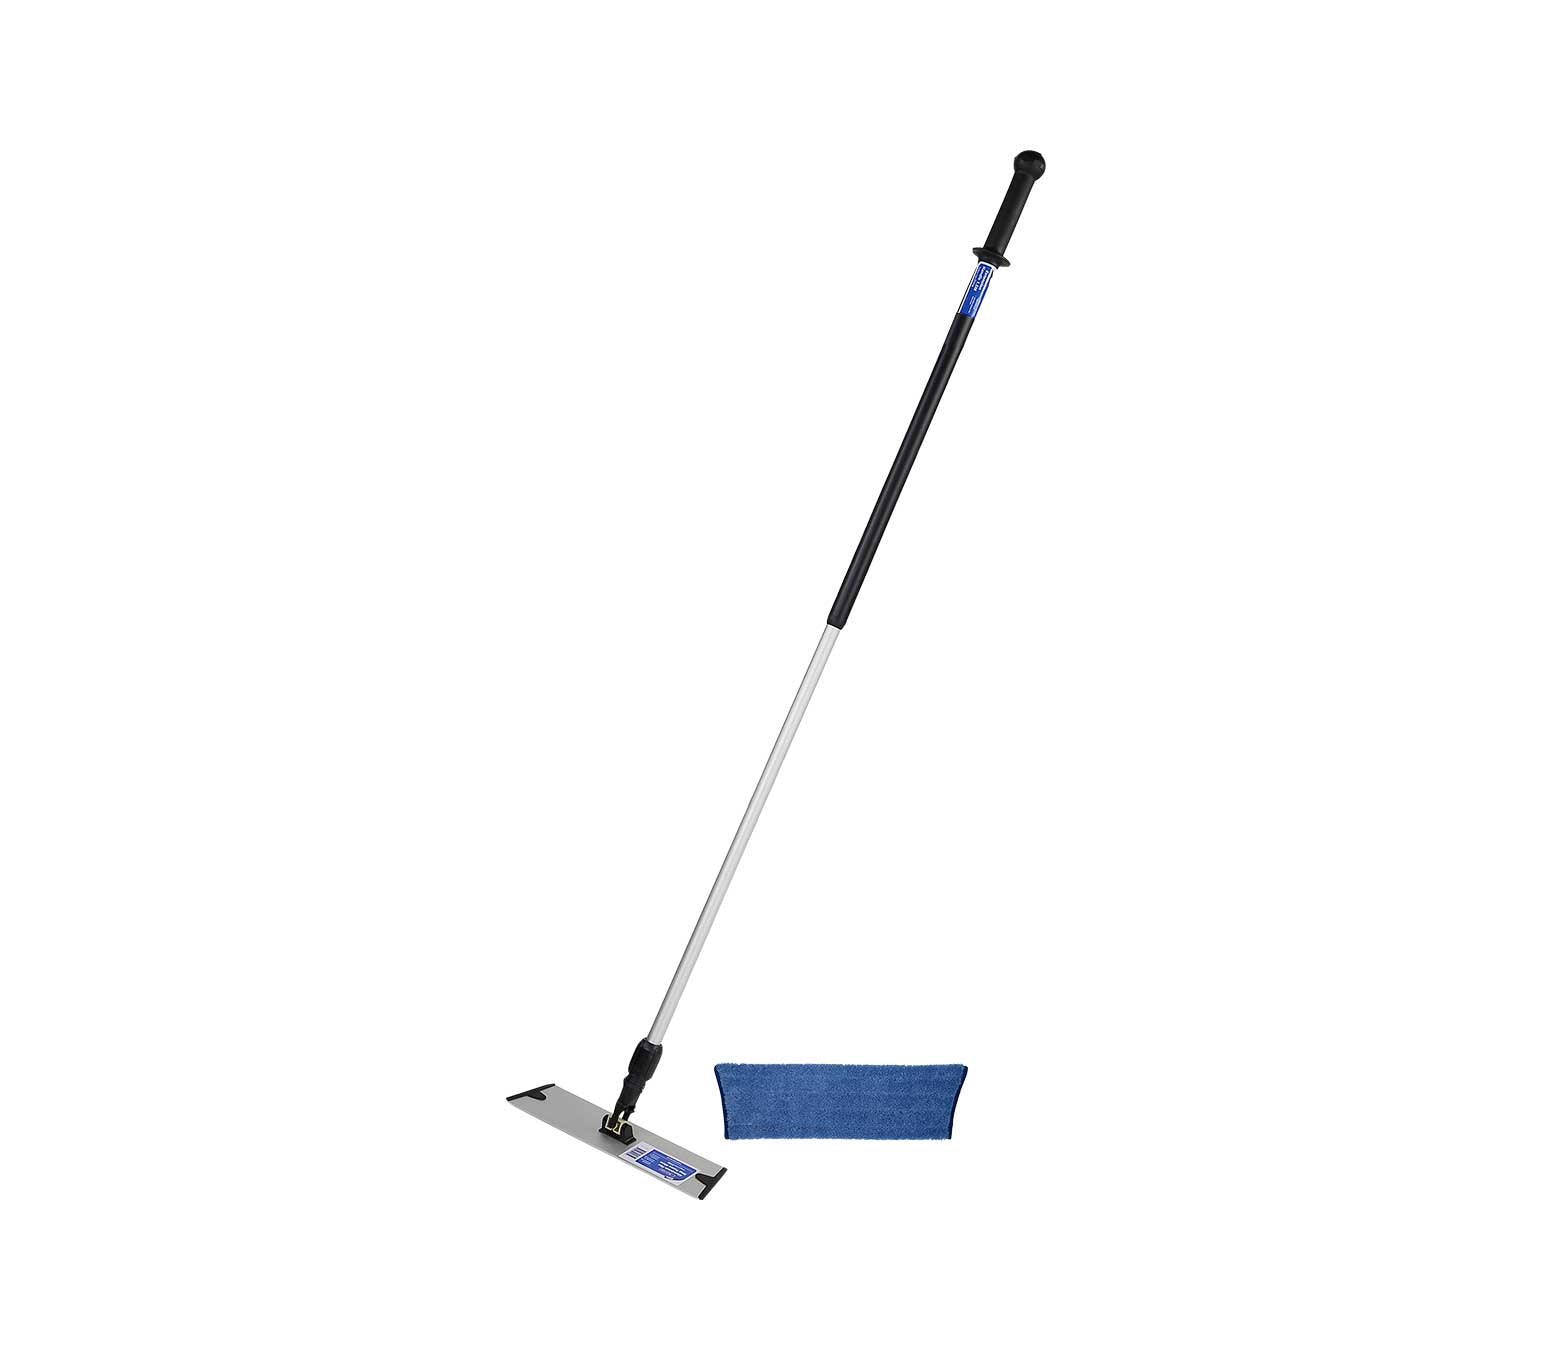 Edco Enduro Flat Mop With Extensions Handle 1.5m. - Complete Enduro Flat Mop